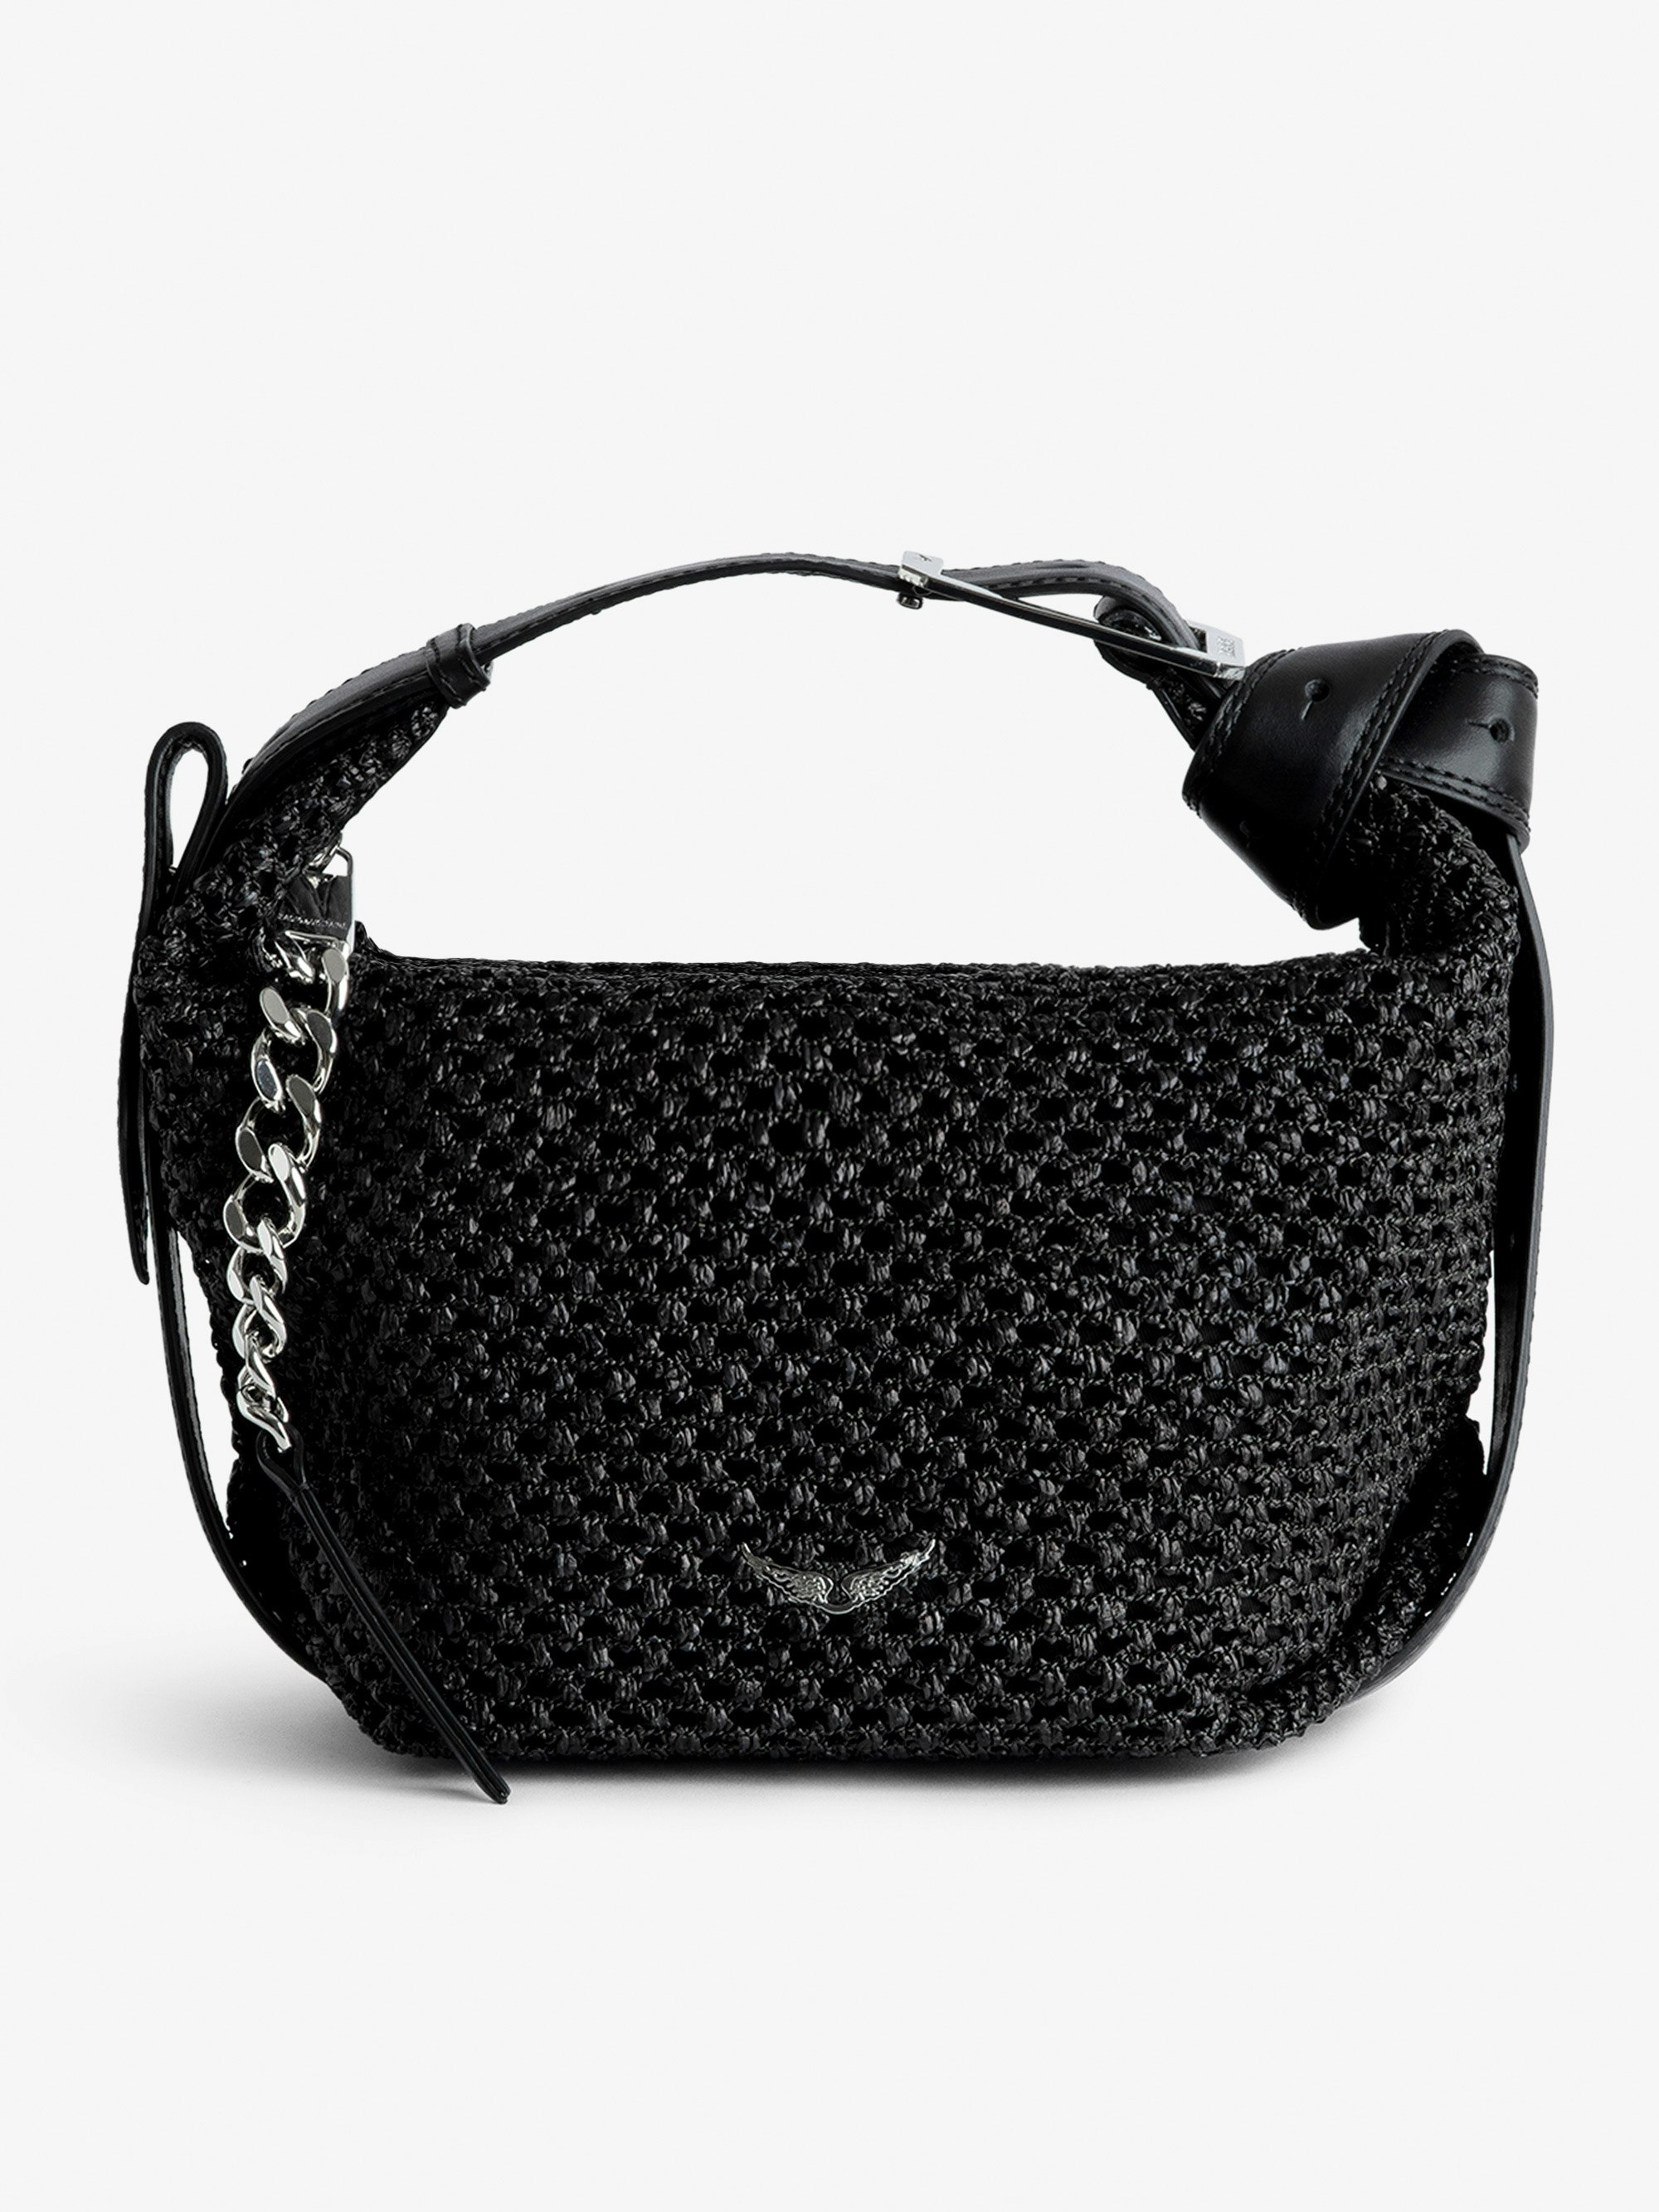 Le Cecilia Bag - Black basket-style bag with leather shoulder strap and metallic C buckle.